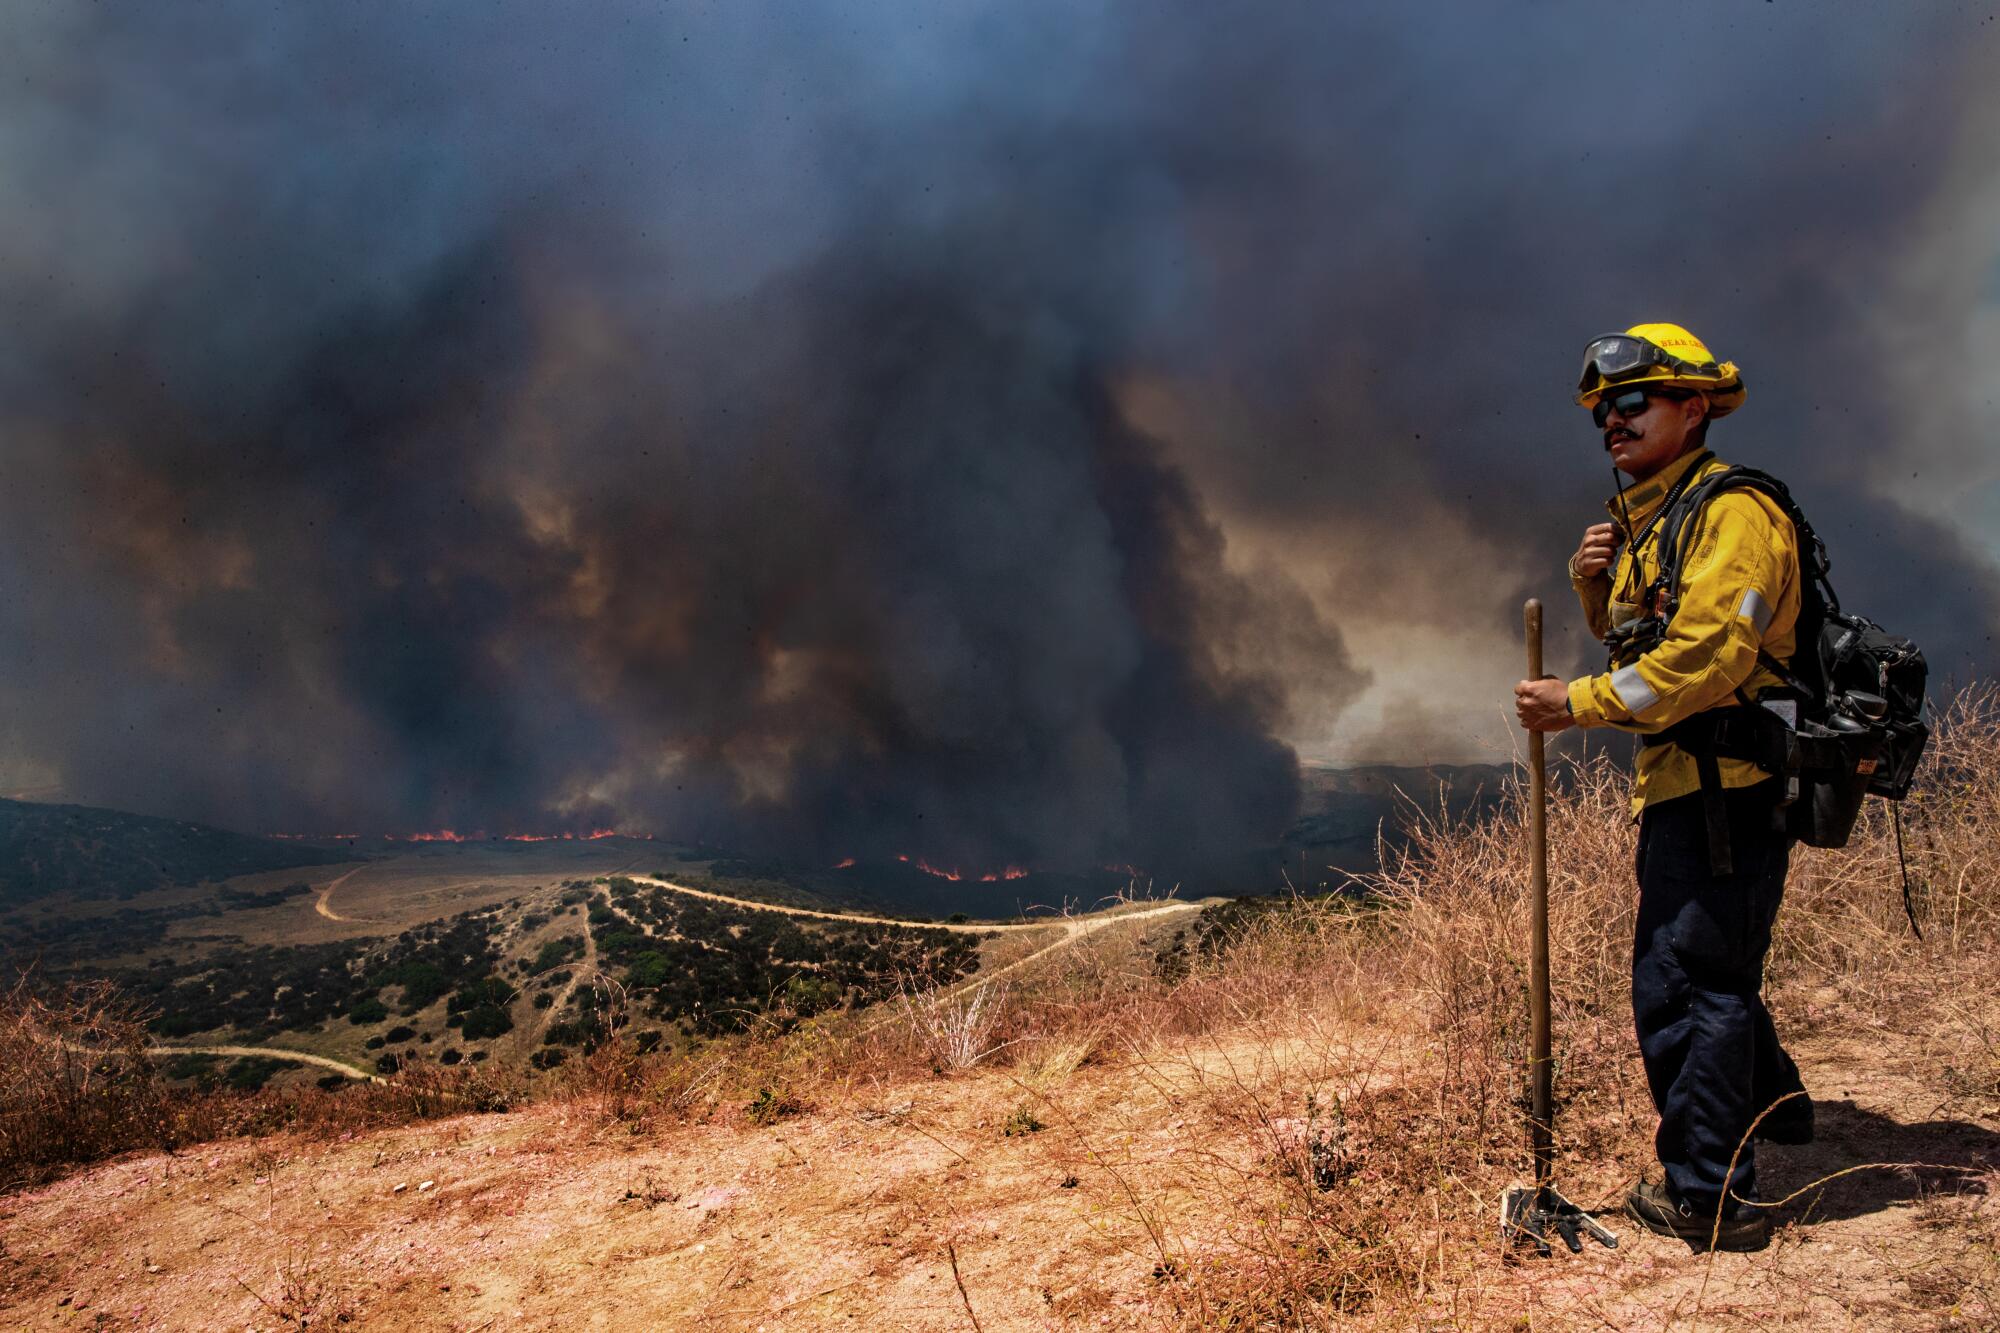 A firefighter stands on a ridge with a fire sending up dense black smoke in the background.
